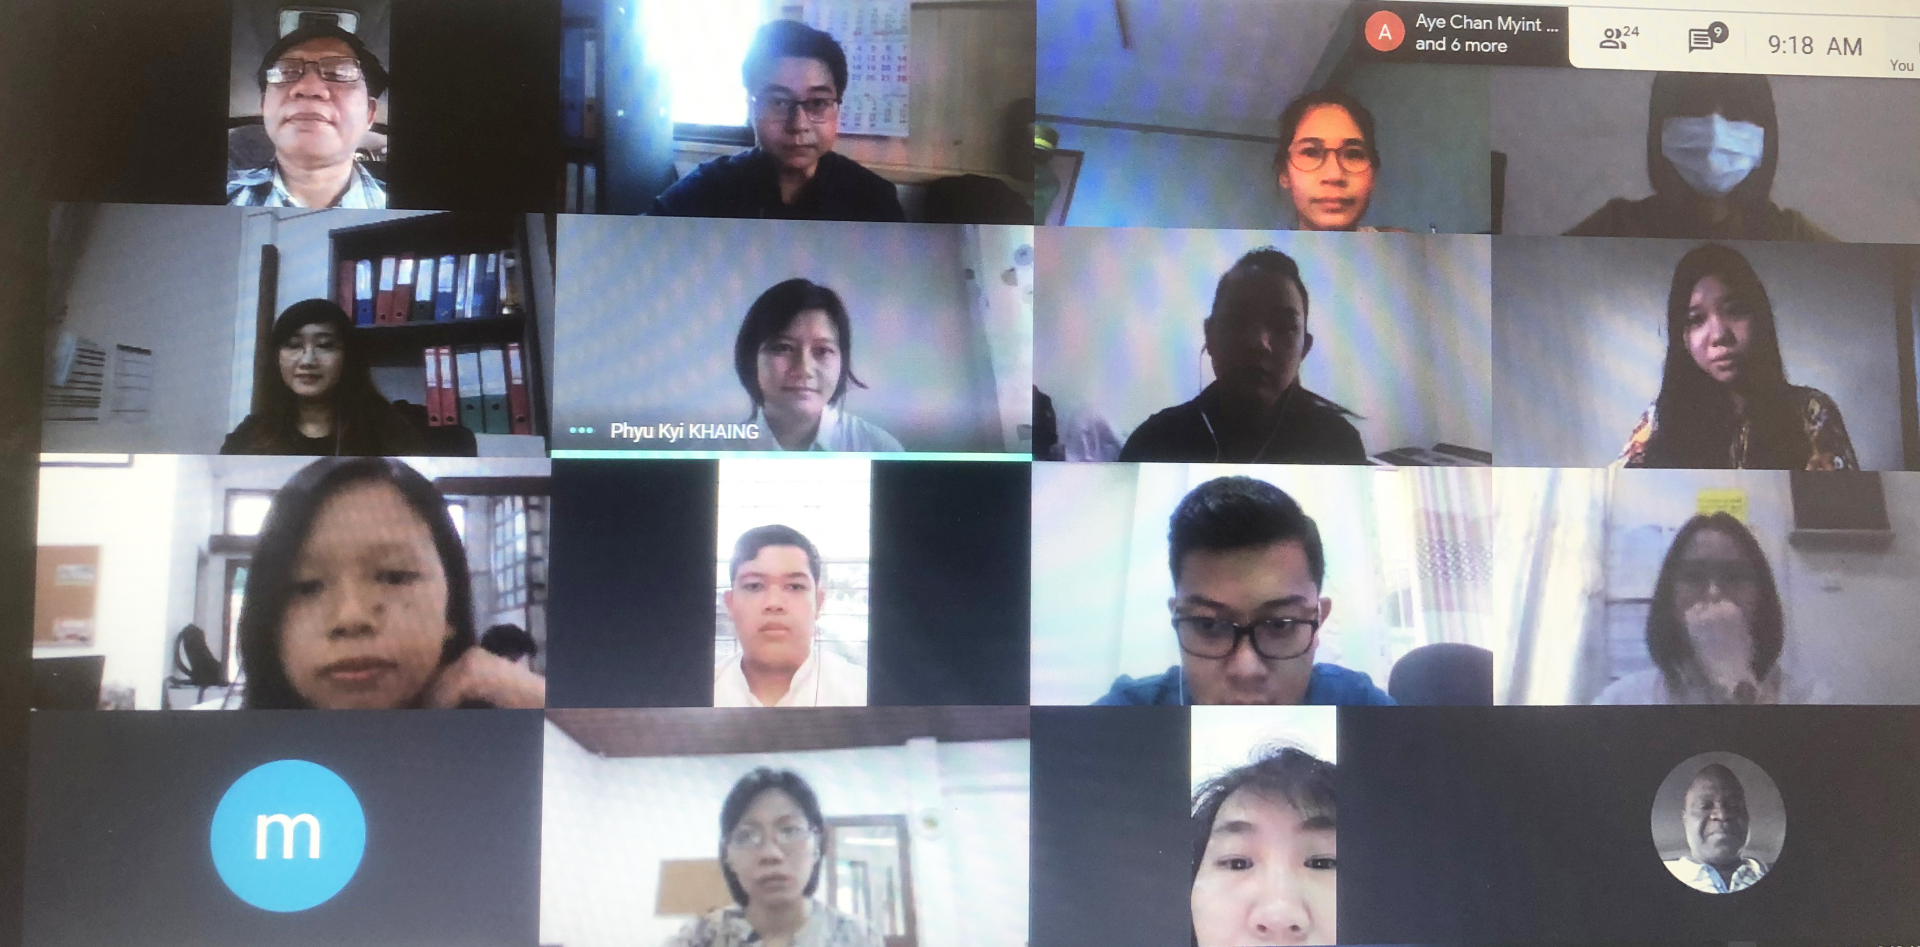 Participants at the virtual meeting for "Detailed Planning and Budgeting kick off Workshop for 2021-2023" in June. PSEA orientation sessions are provided to the Sub-recipients during these workshops. Photo: UNOPS